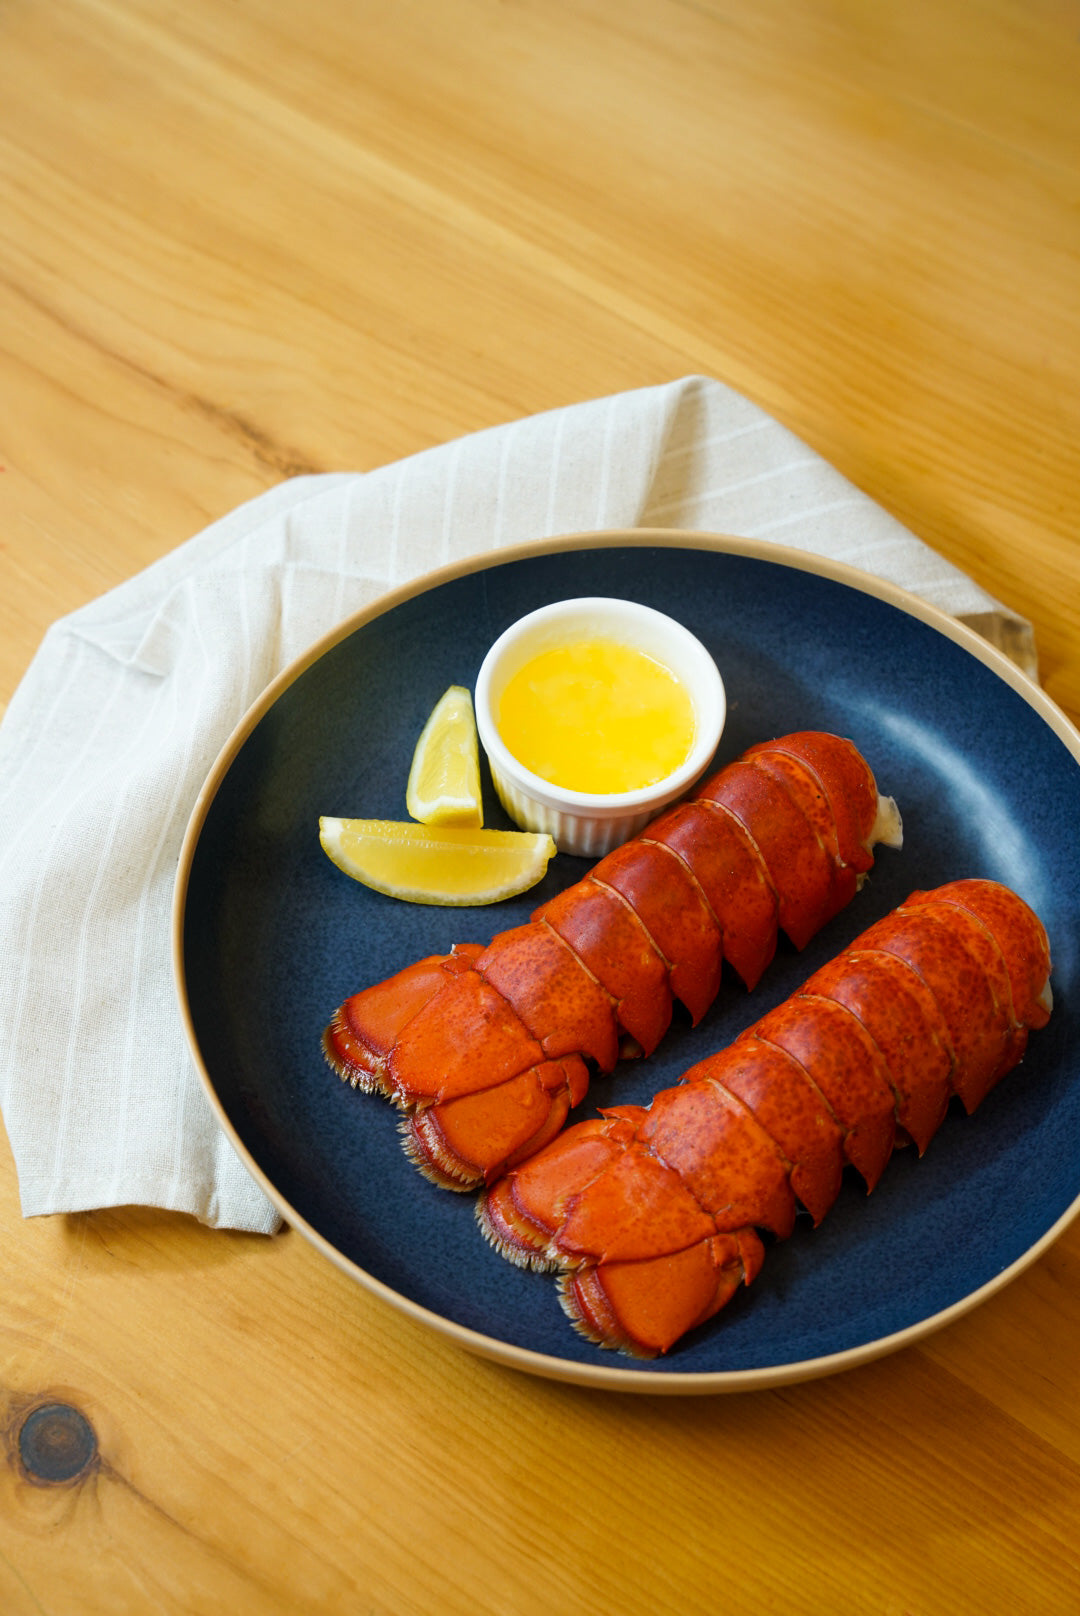 Maine Lobster Tail - 4-5 oz